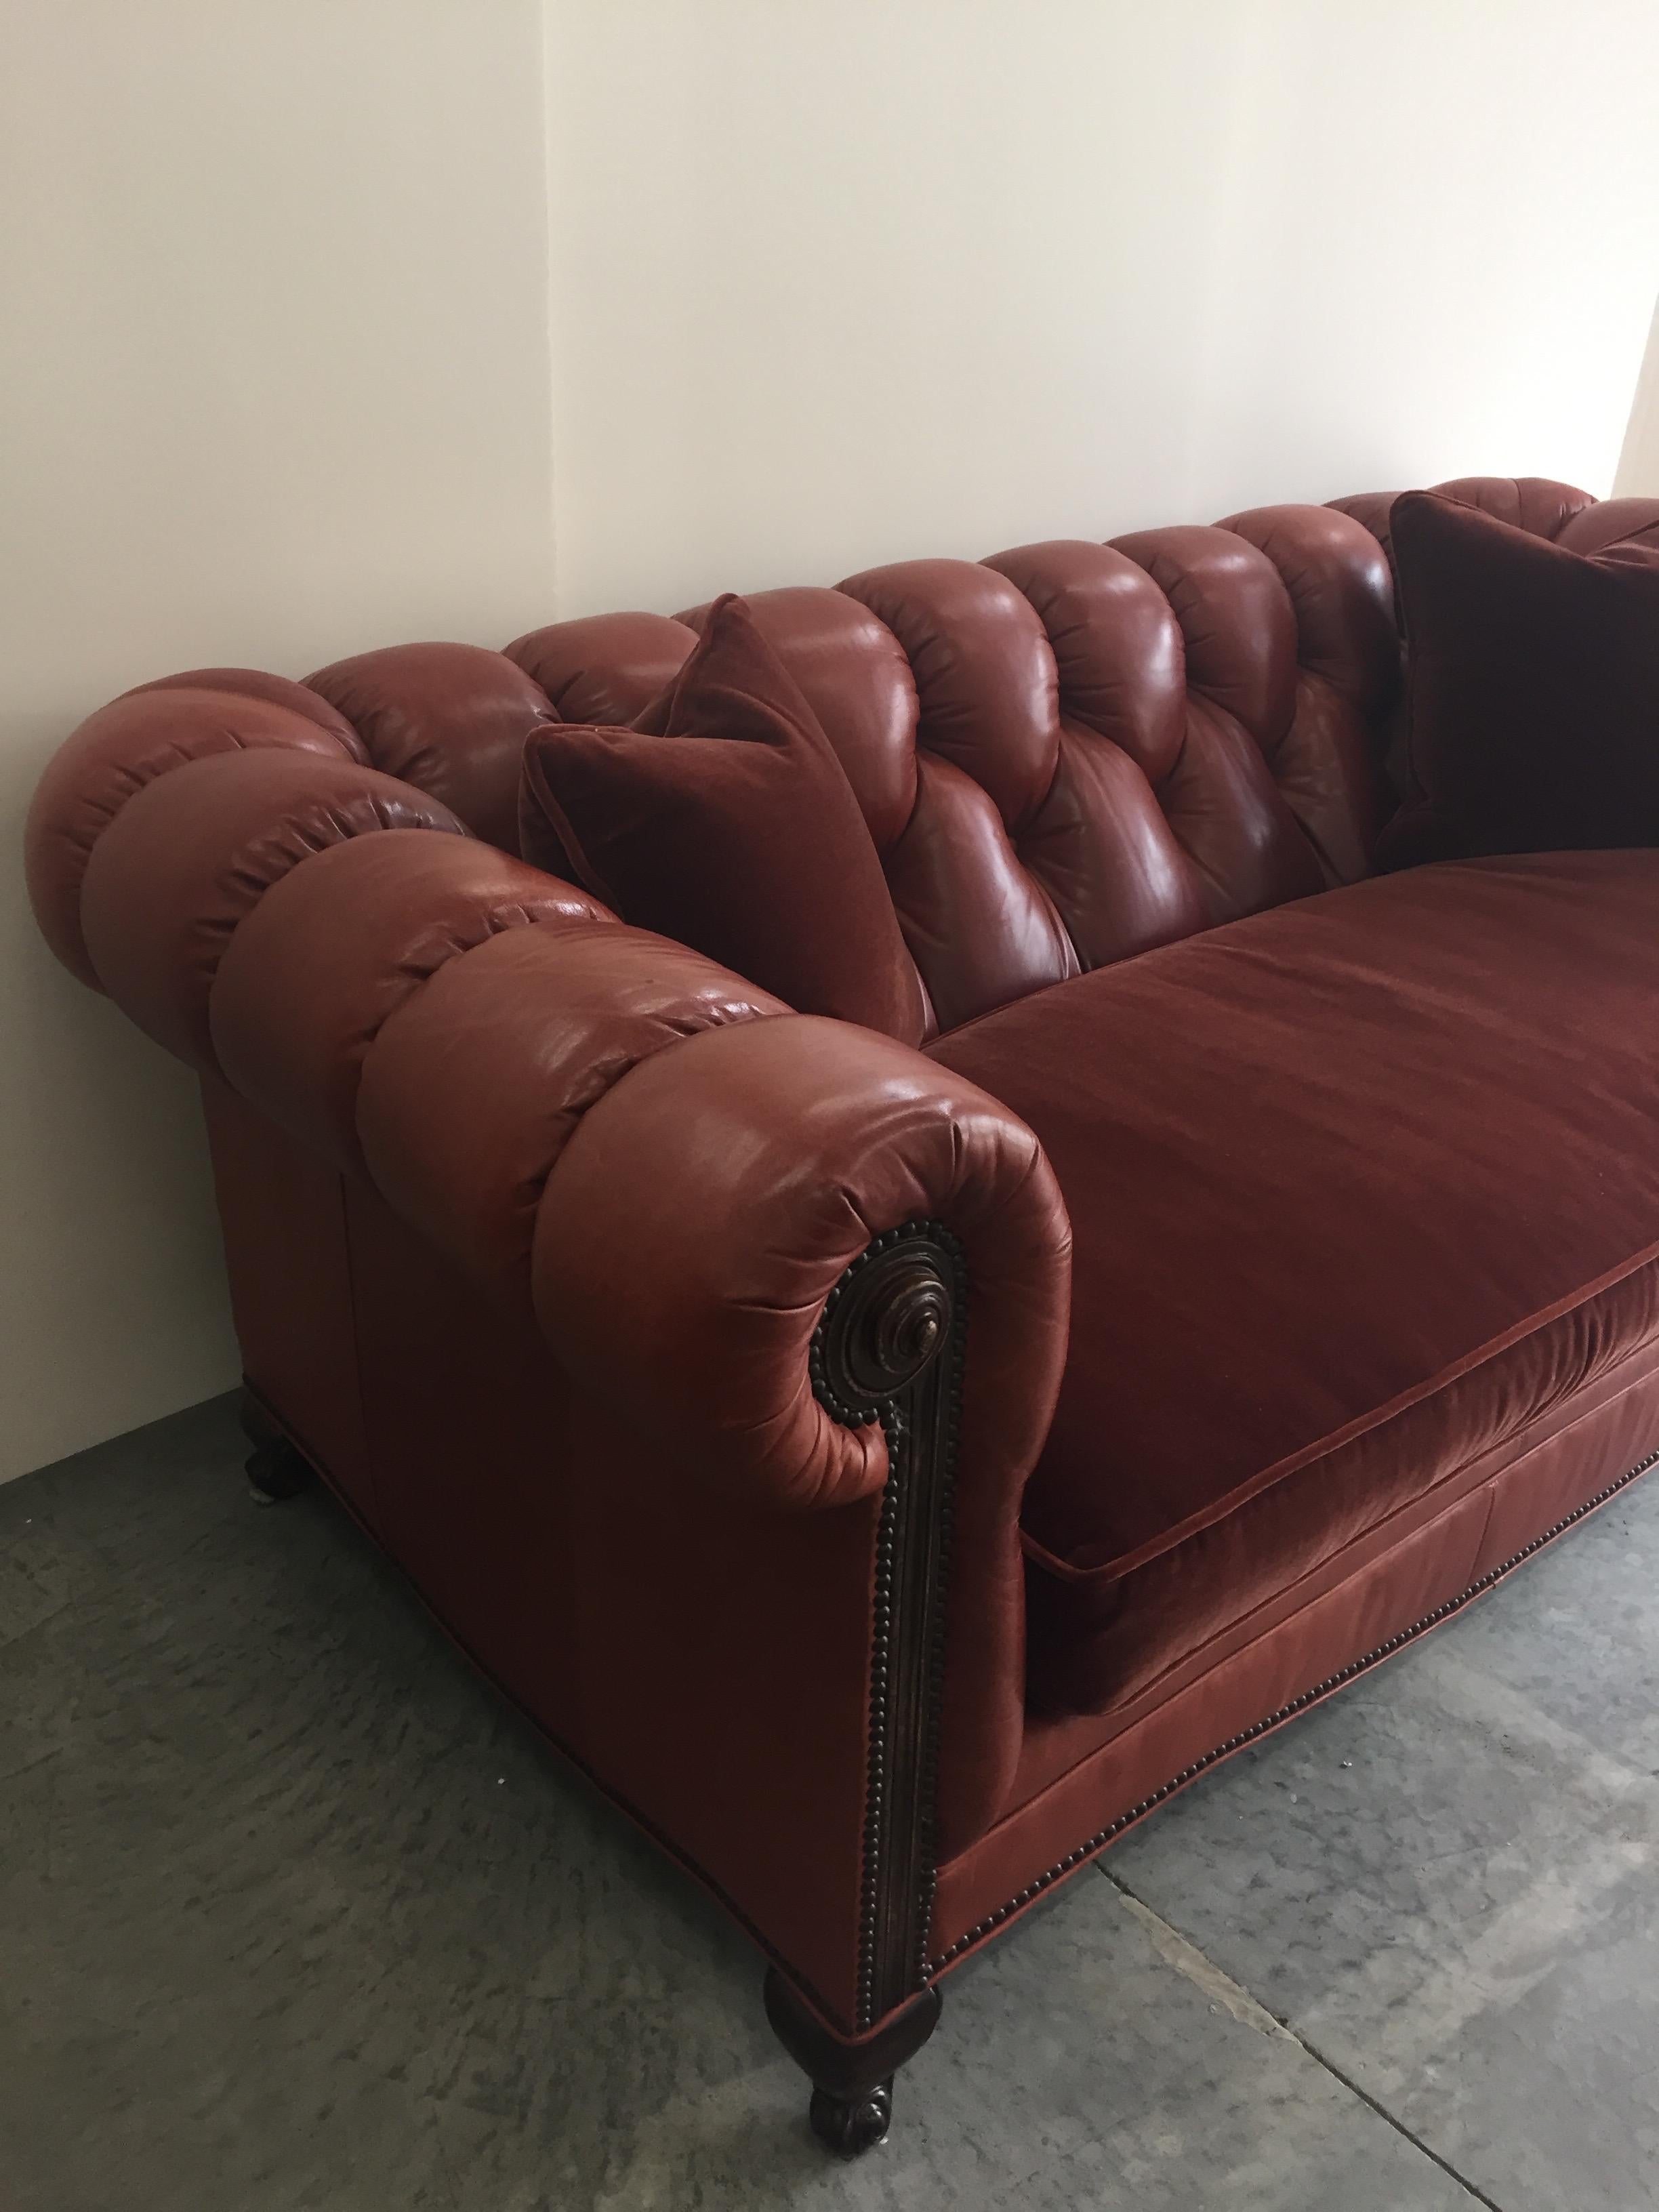 North American Handsome Leather and Mohair Chesterfield Sofa